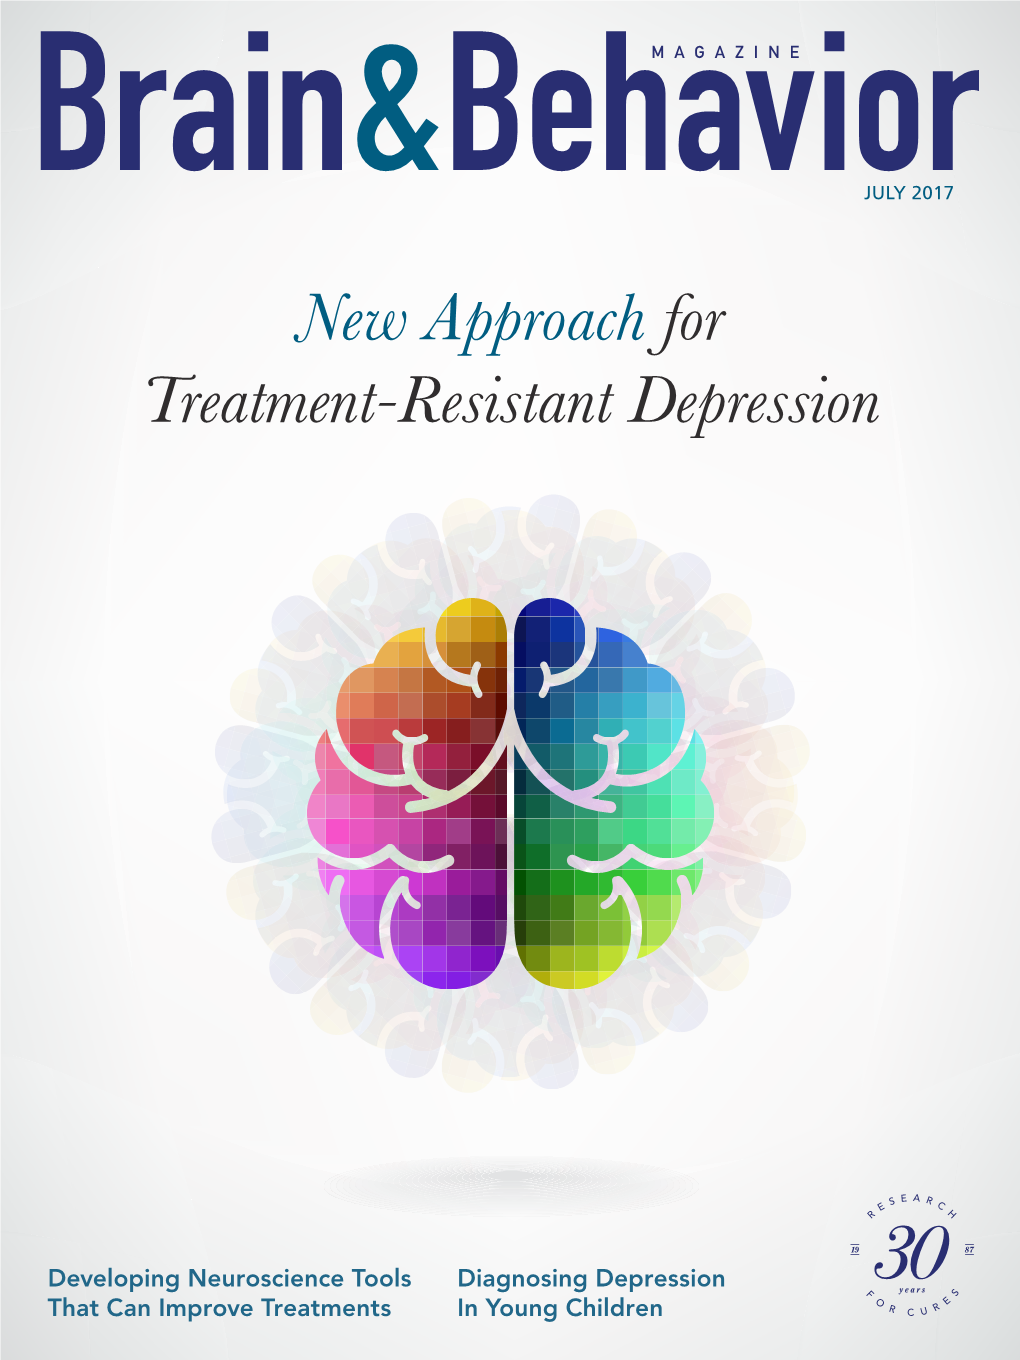 New Approach for Treatment-Resistant Depression